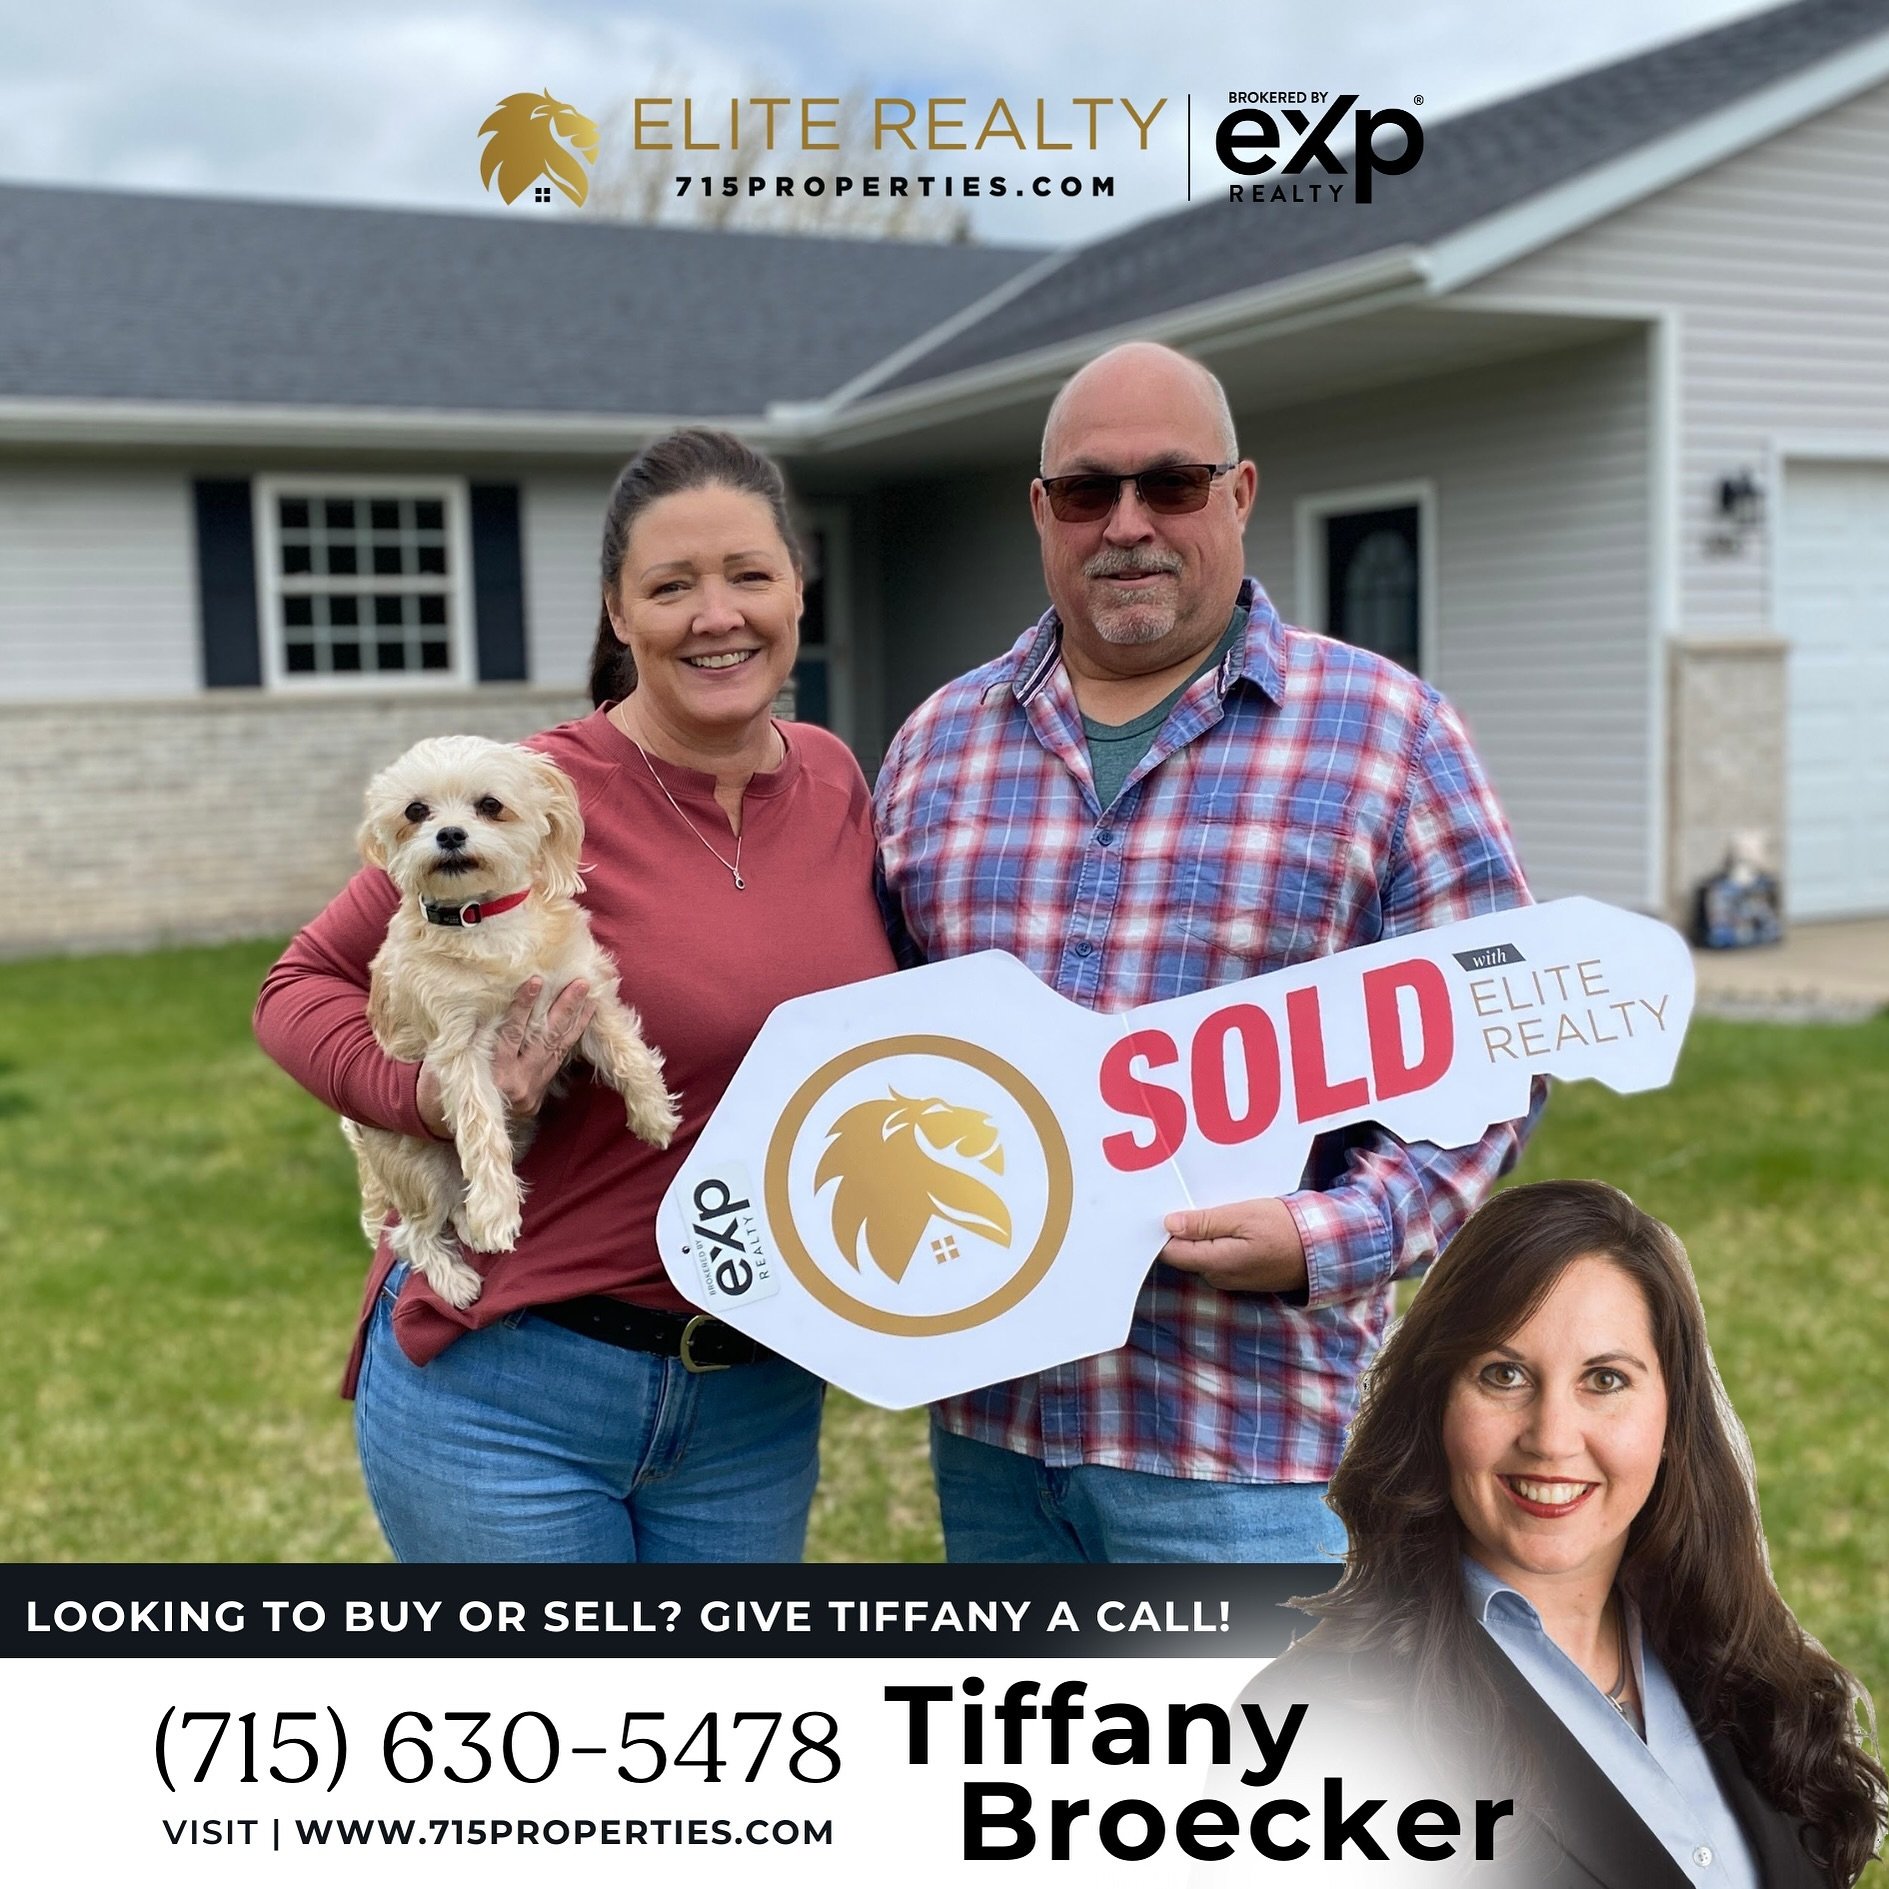 From the first showing to the Sold photos, it has been an amazing journey. Thanks for all the fun...more to come! It was a pleasure doing business with you!!! 🏡 Are you considering buying or selling?📱 Call Tiffany (715) 630-5478 #EliteRealtyTeam #S